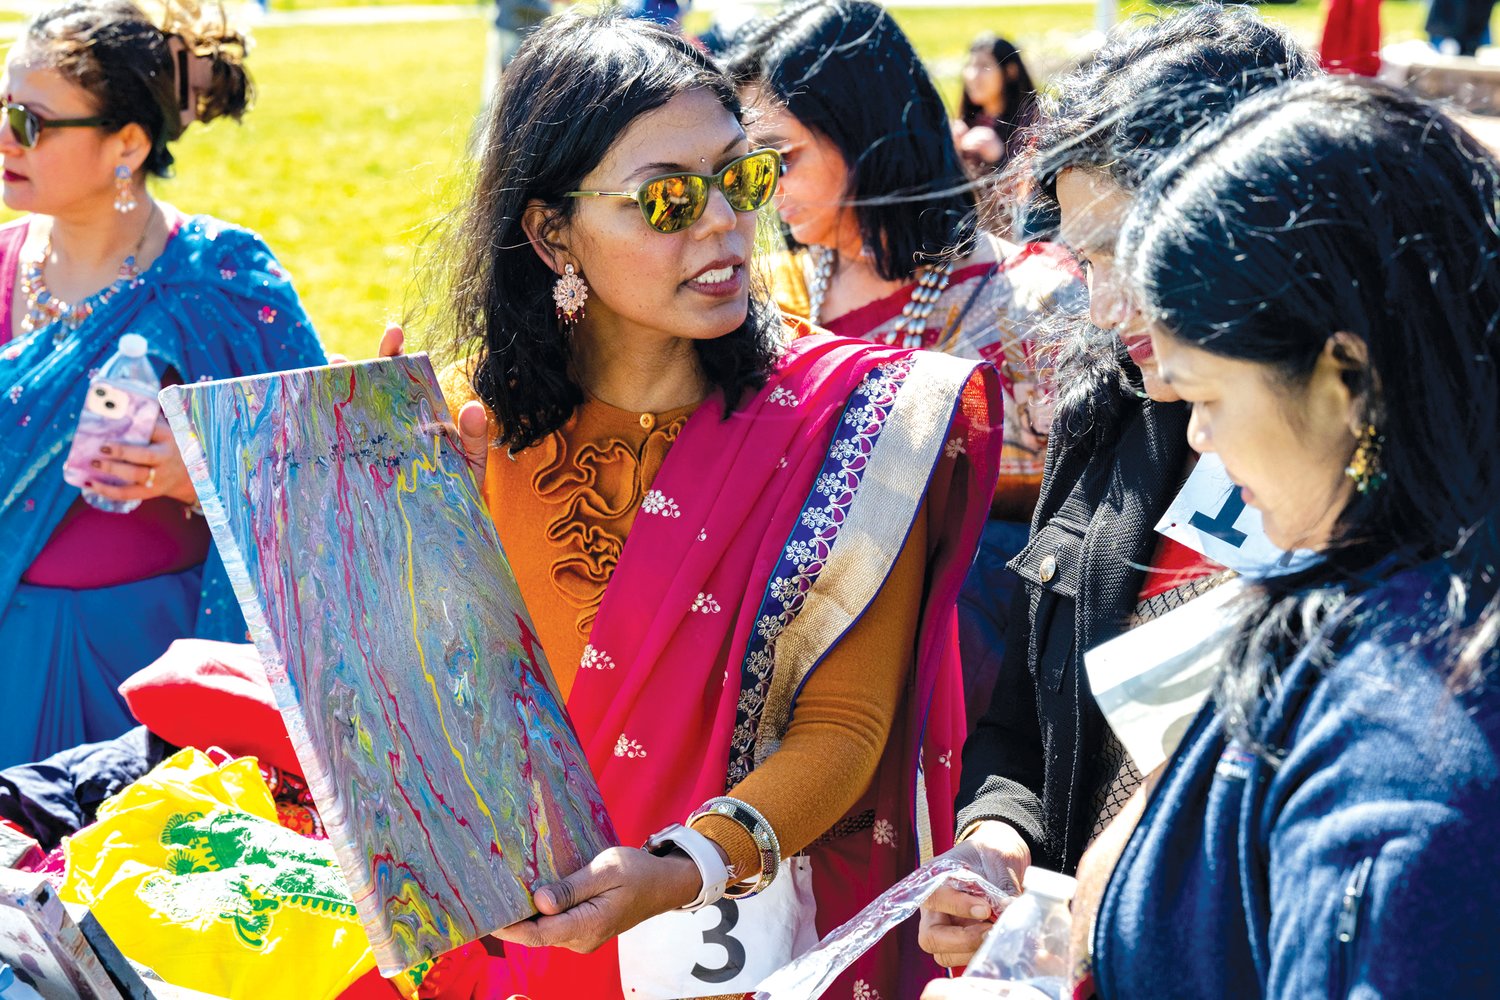 Santosh Yadav holds up a piece of art during a community celebration of culture and unity at Central Park in Doylestown.